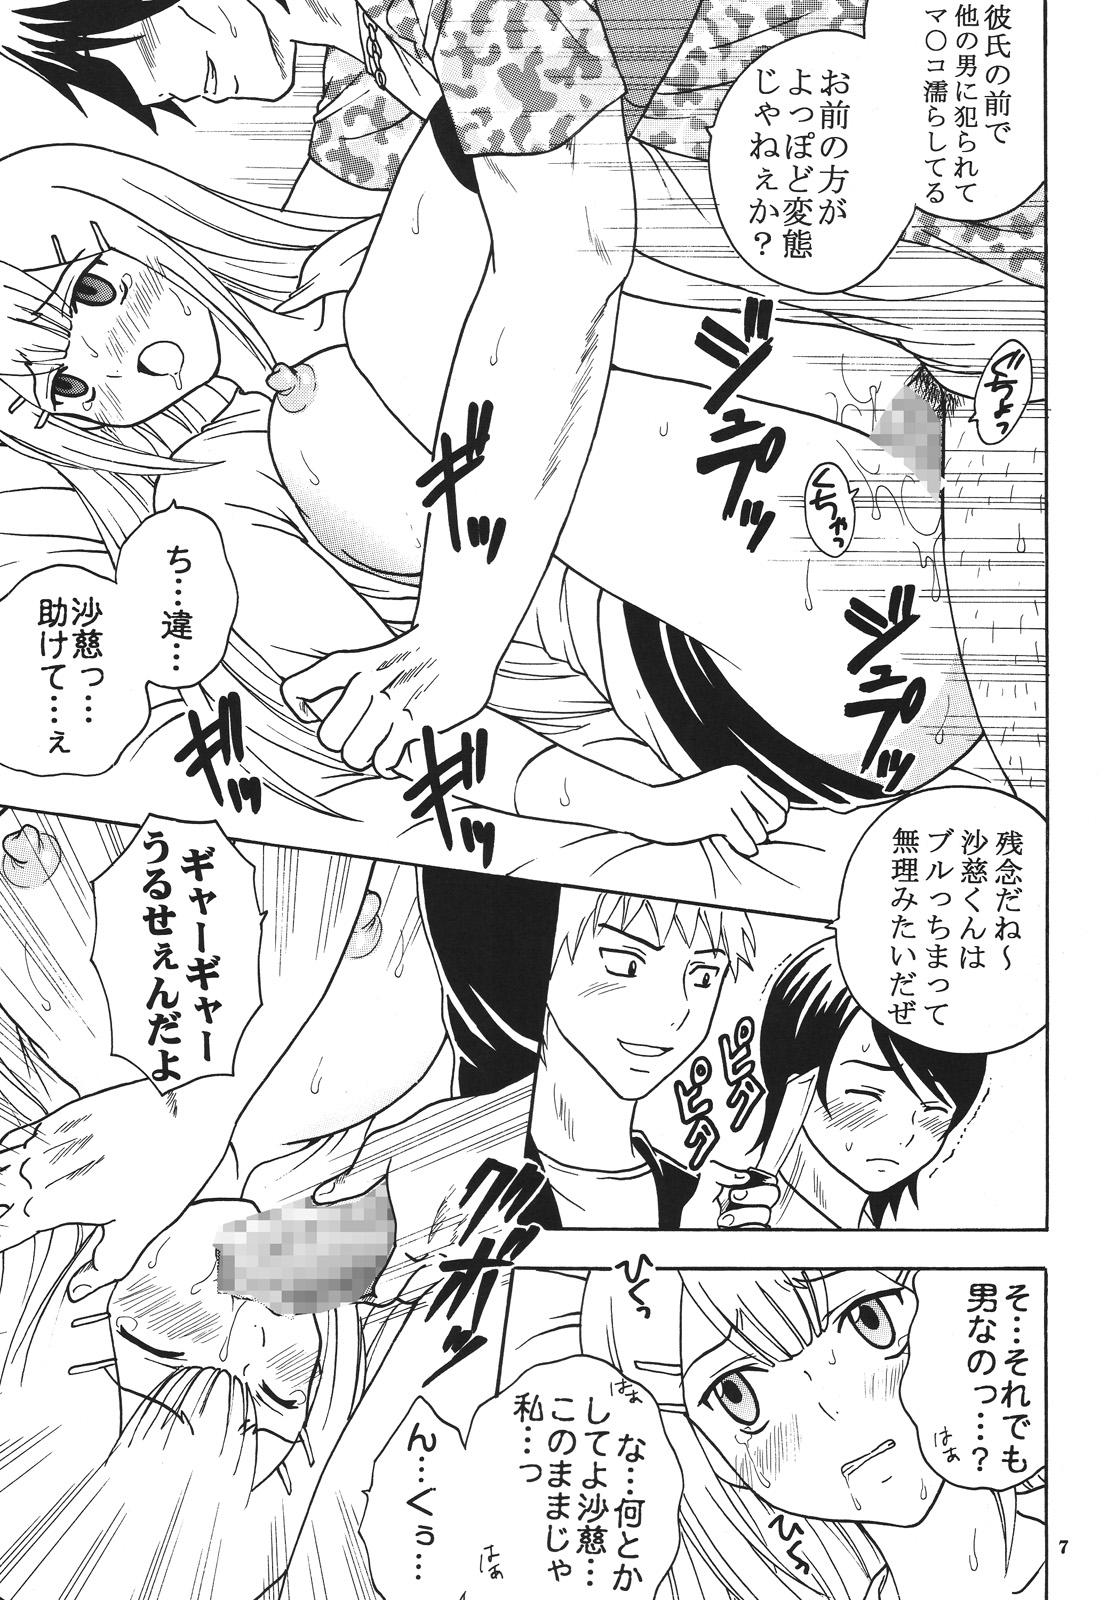 Blondes COSMIC BREED 00 - Gundam 00 Chica - Page 8